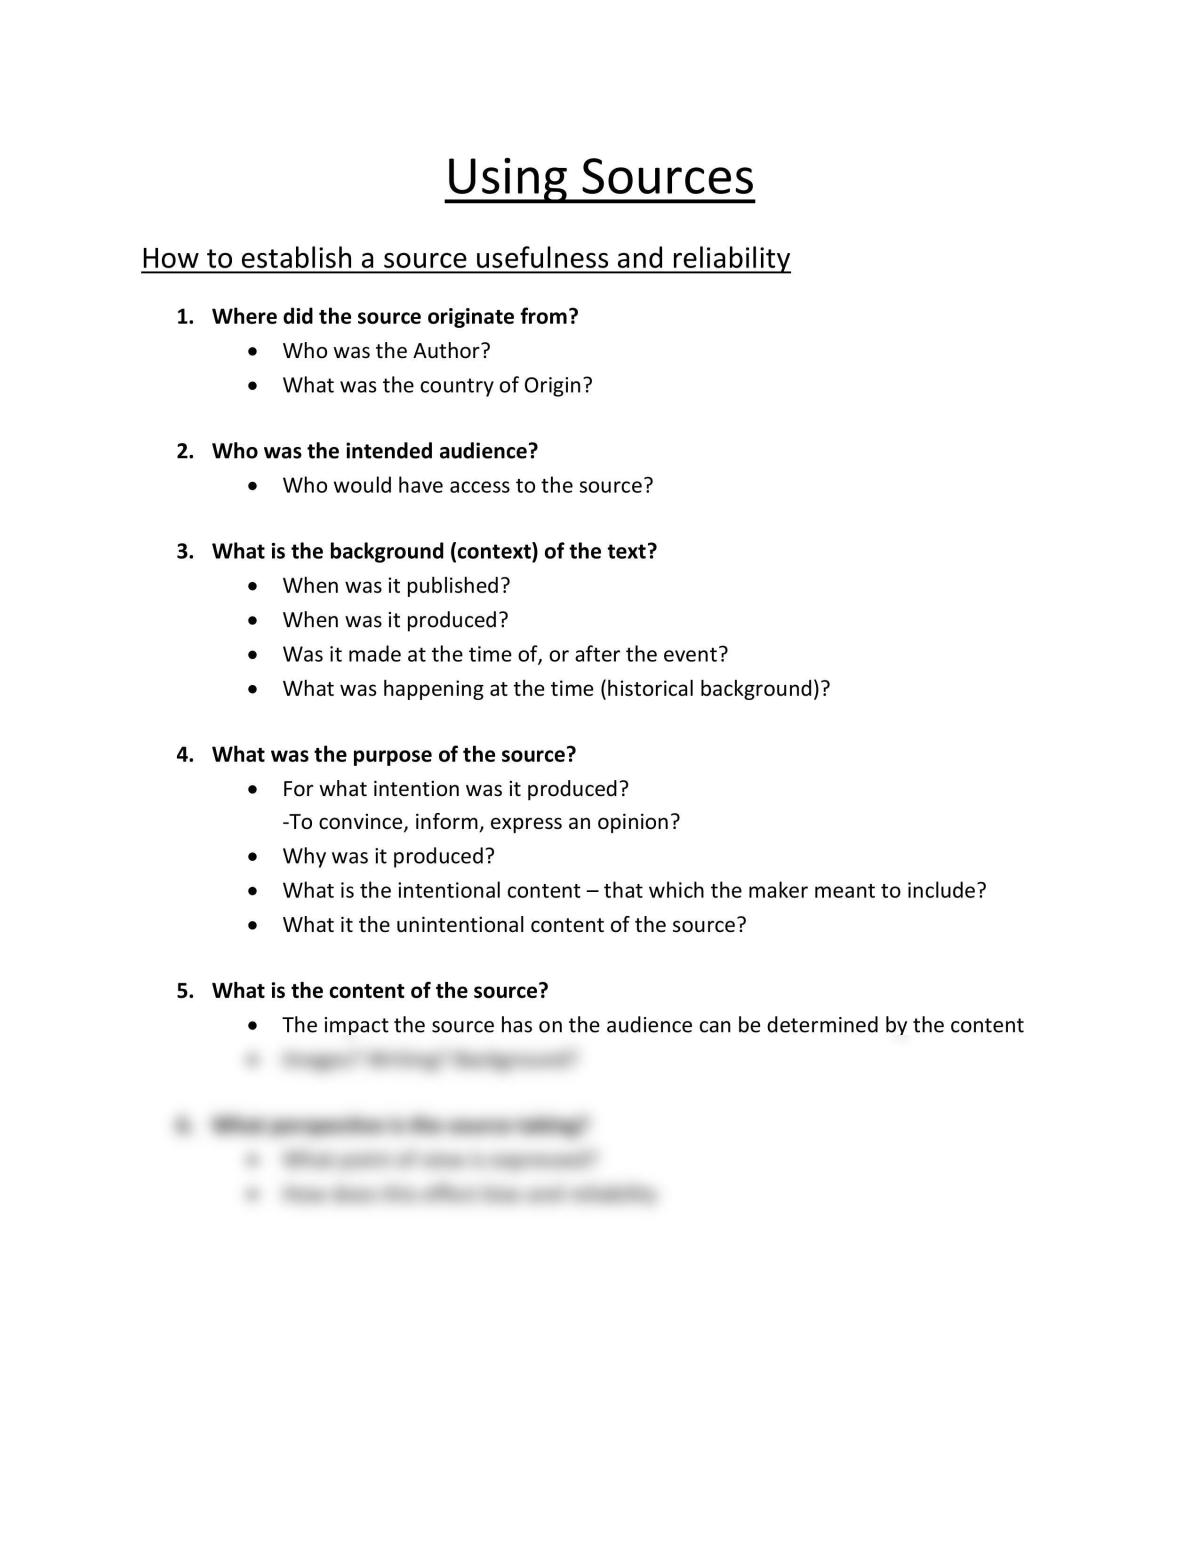 How to use sources - Page 1